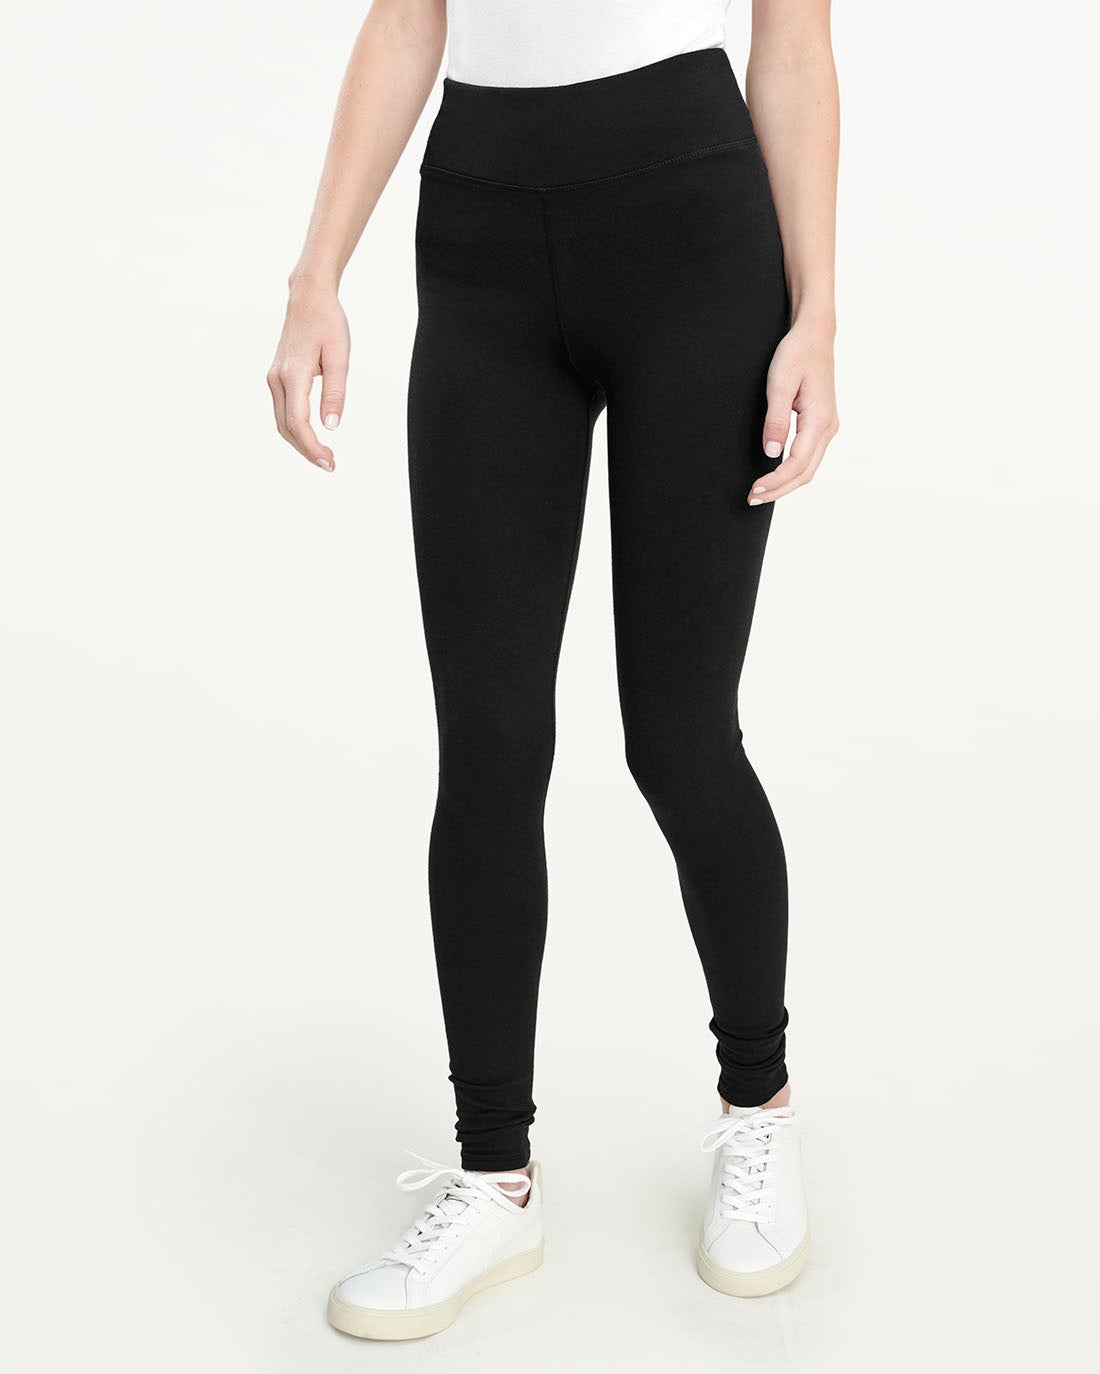 French Terry Legging